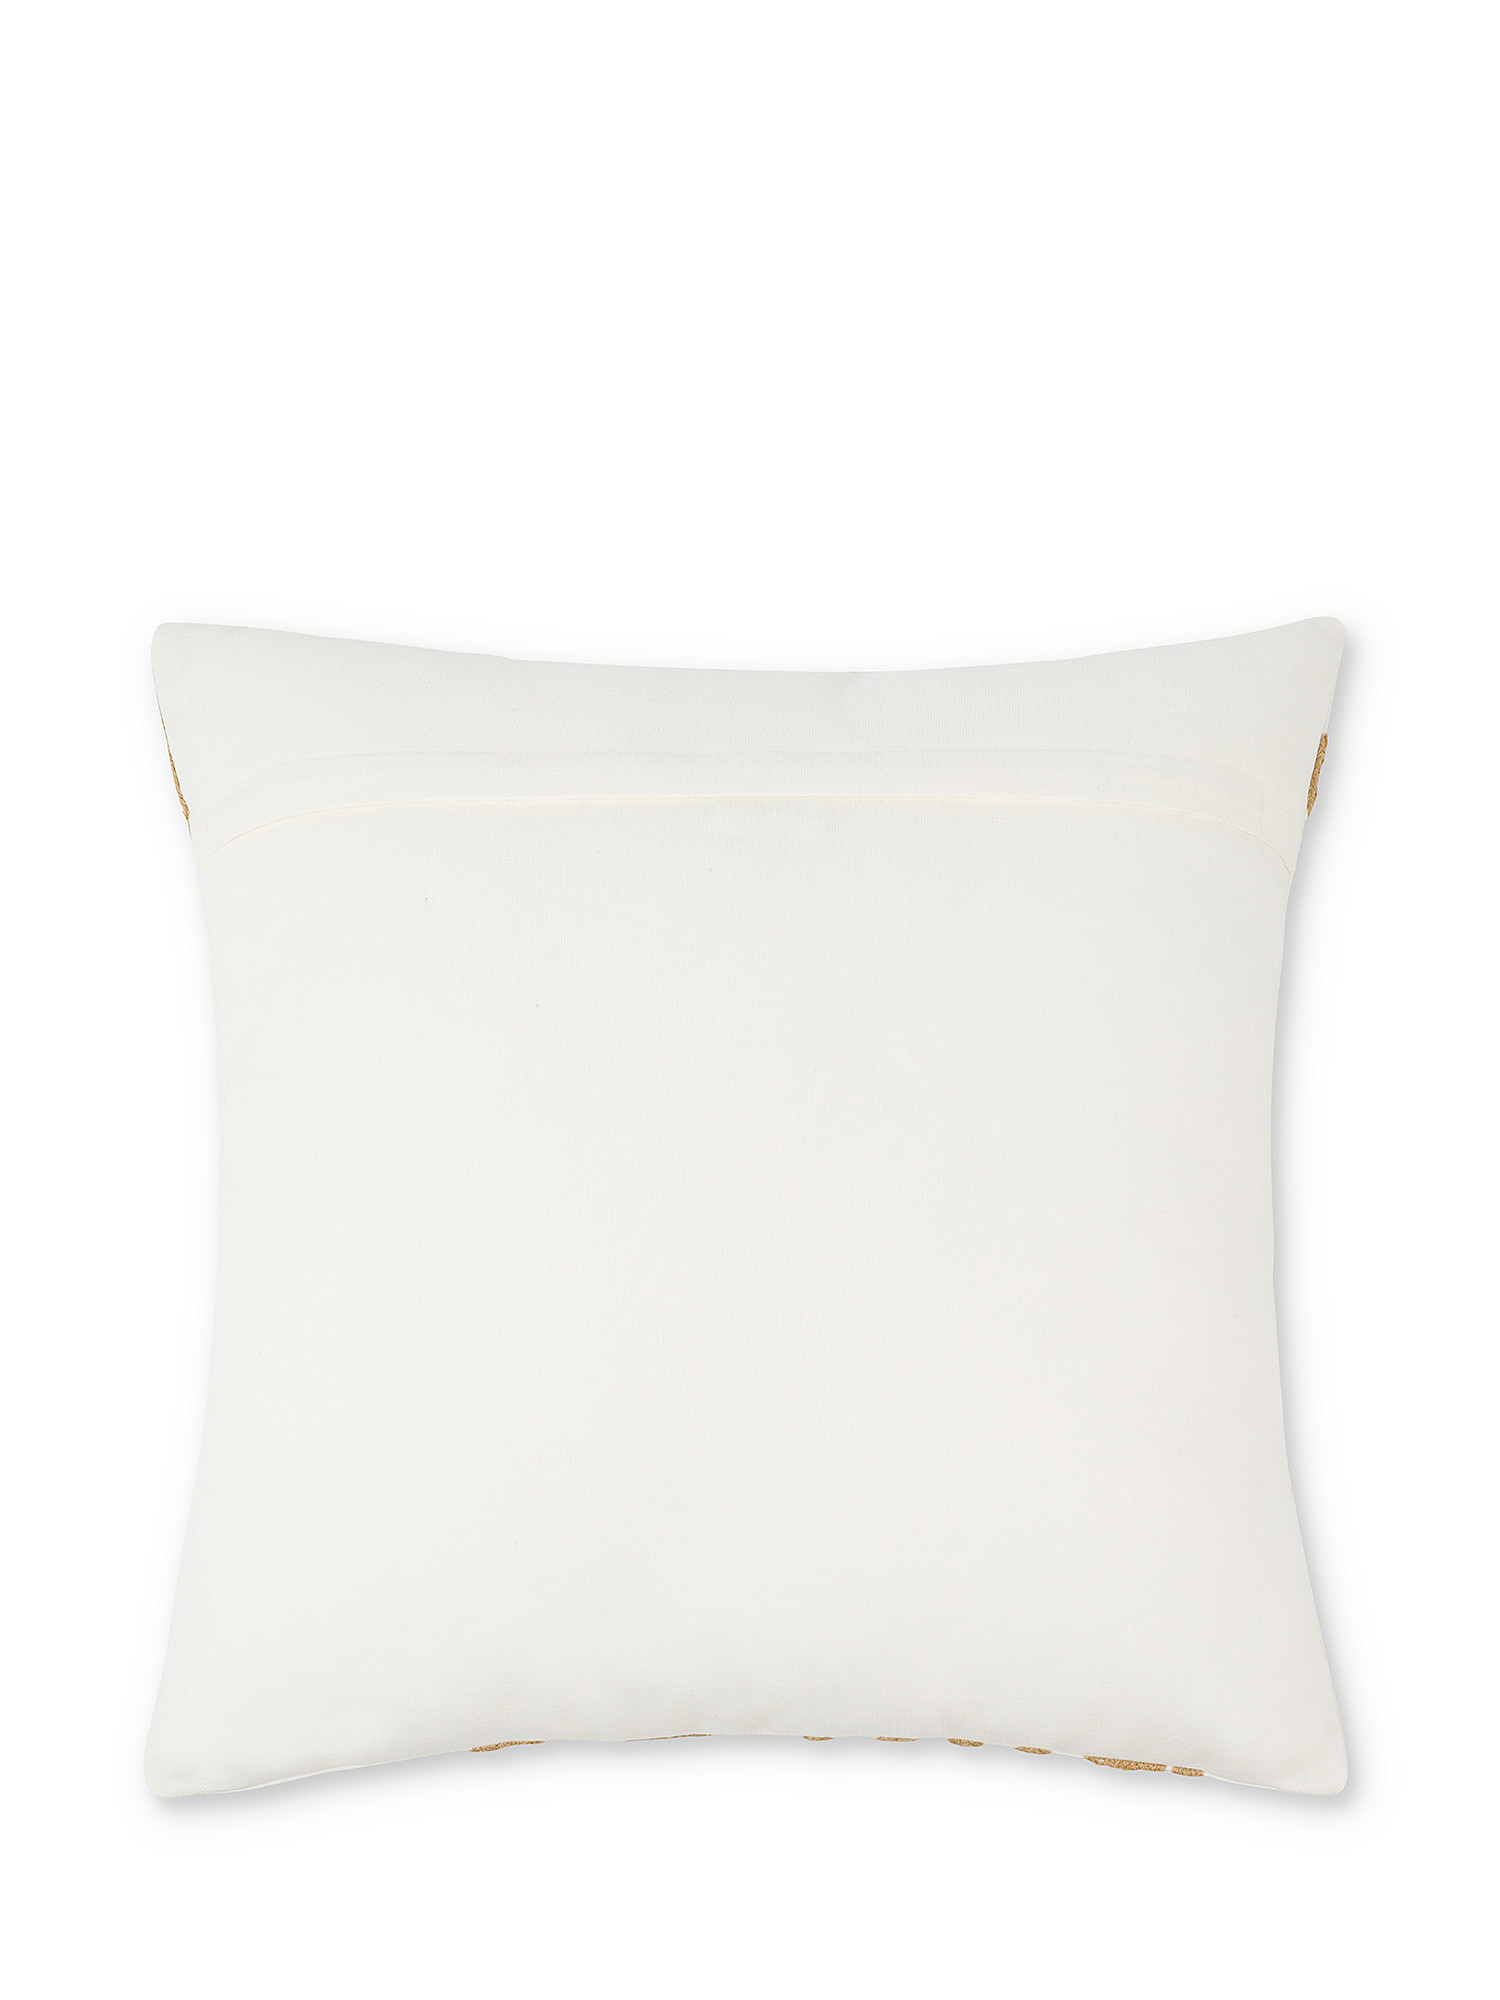 Cotton cushion with coral embroidery 45x45cm, Beige, large image number 1